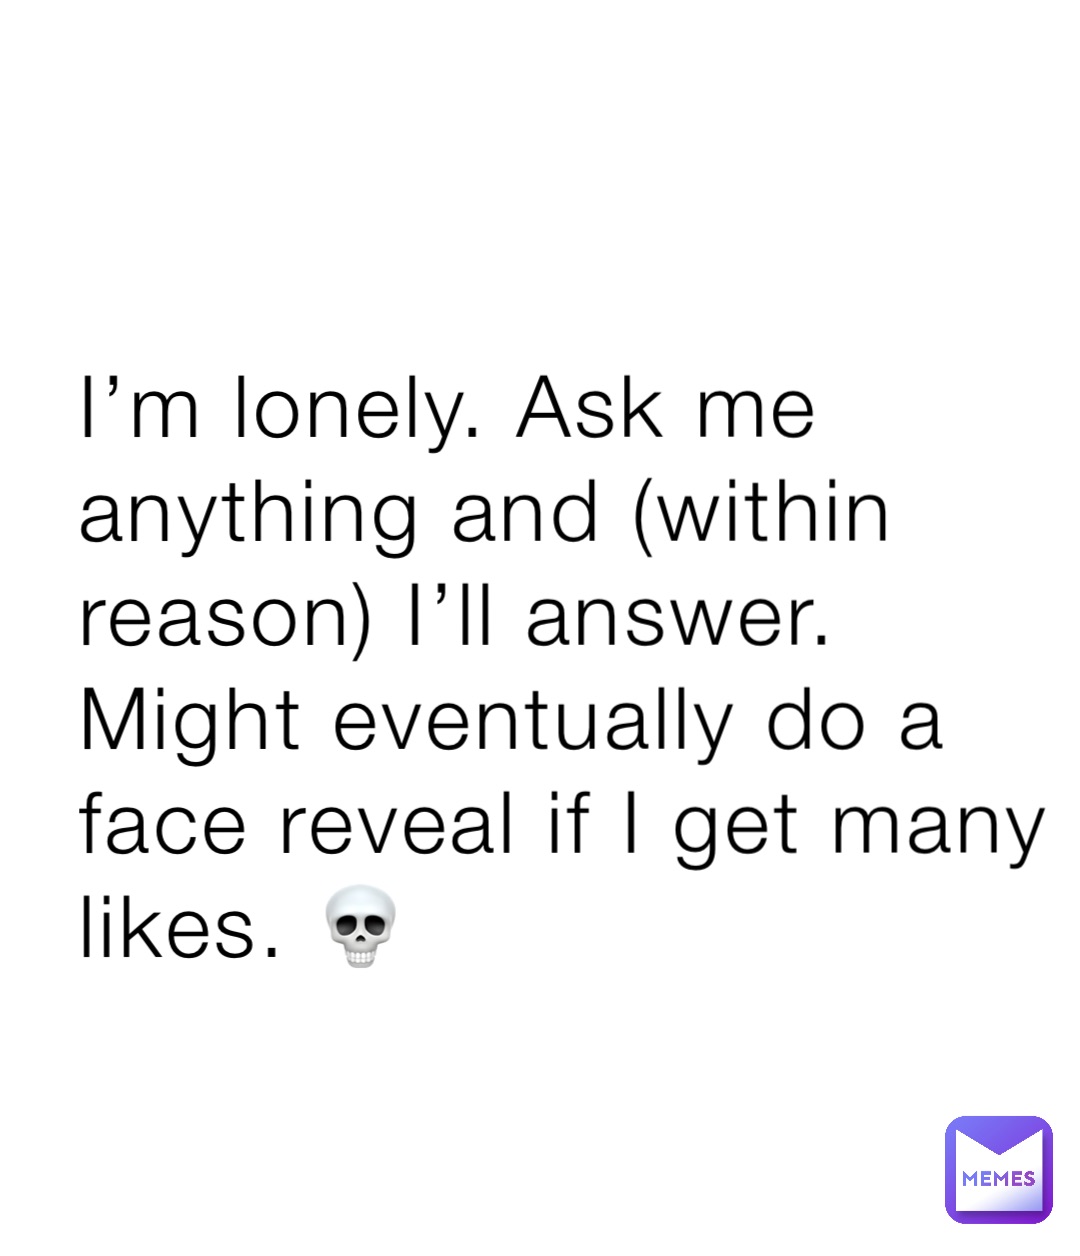 I’m lonely. Ask me anything and (within reason) I’ll answer. Might eventually do a face reveal if I get many likes. 💀